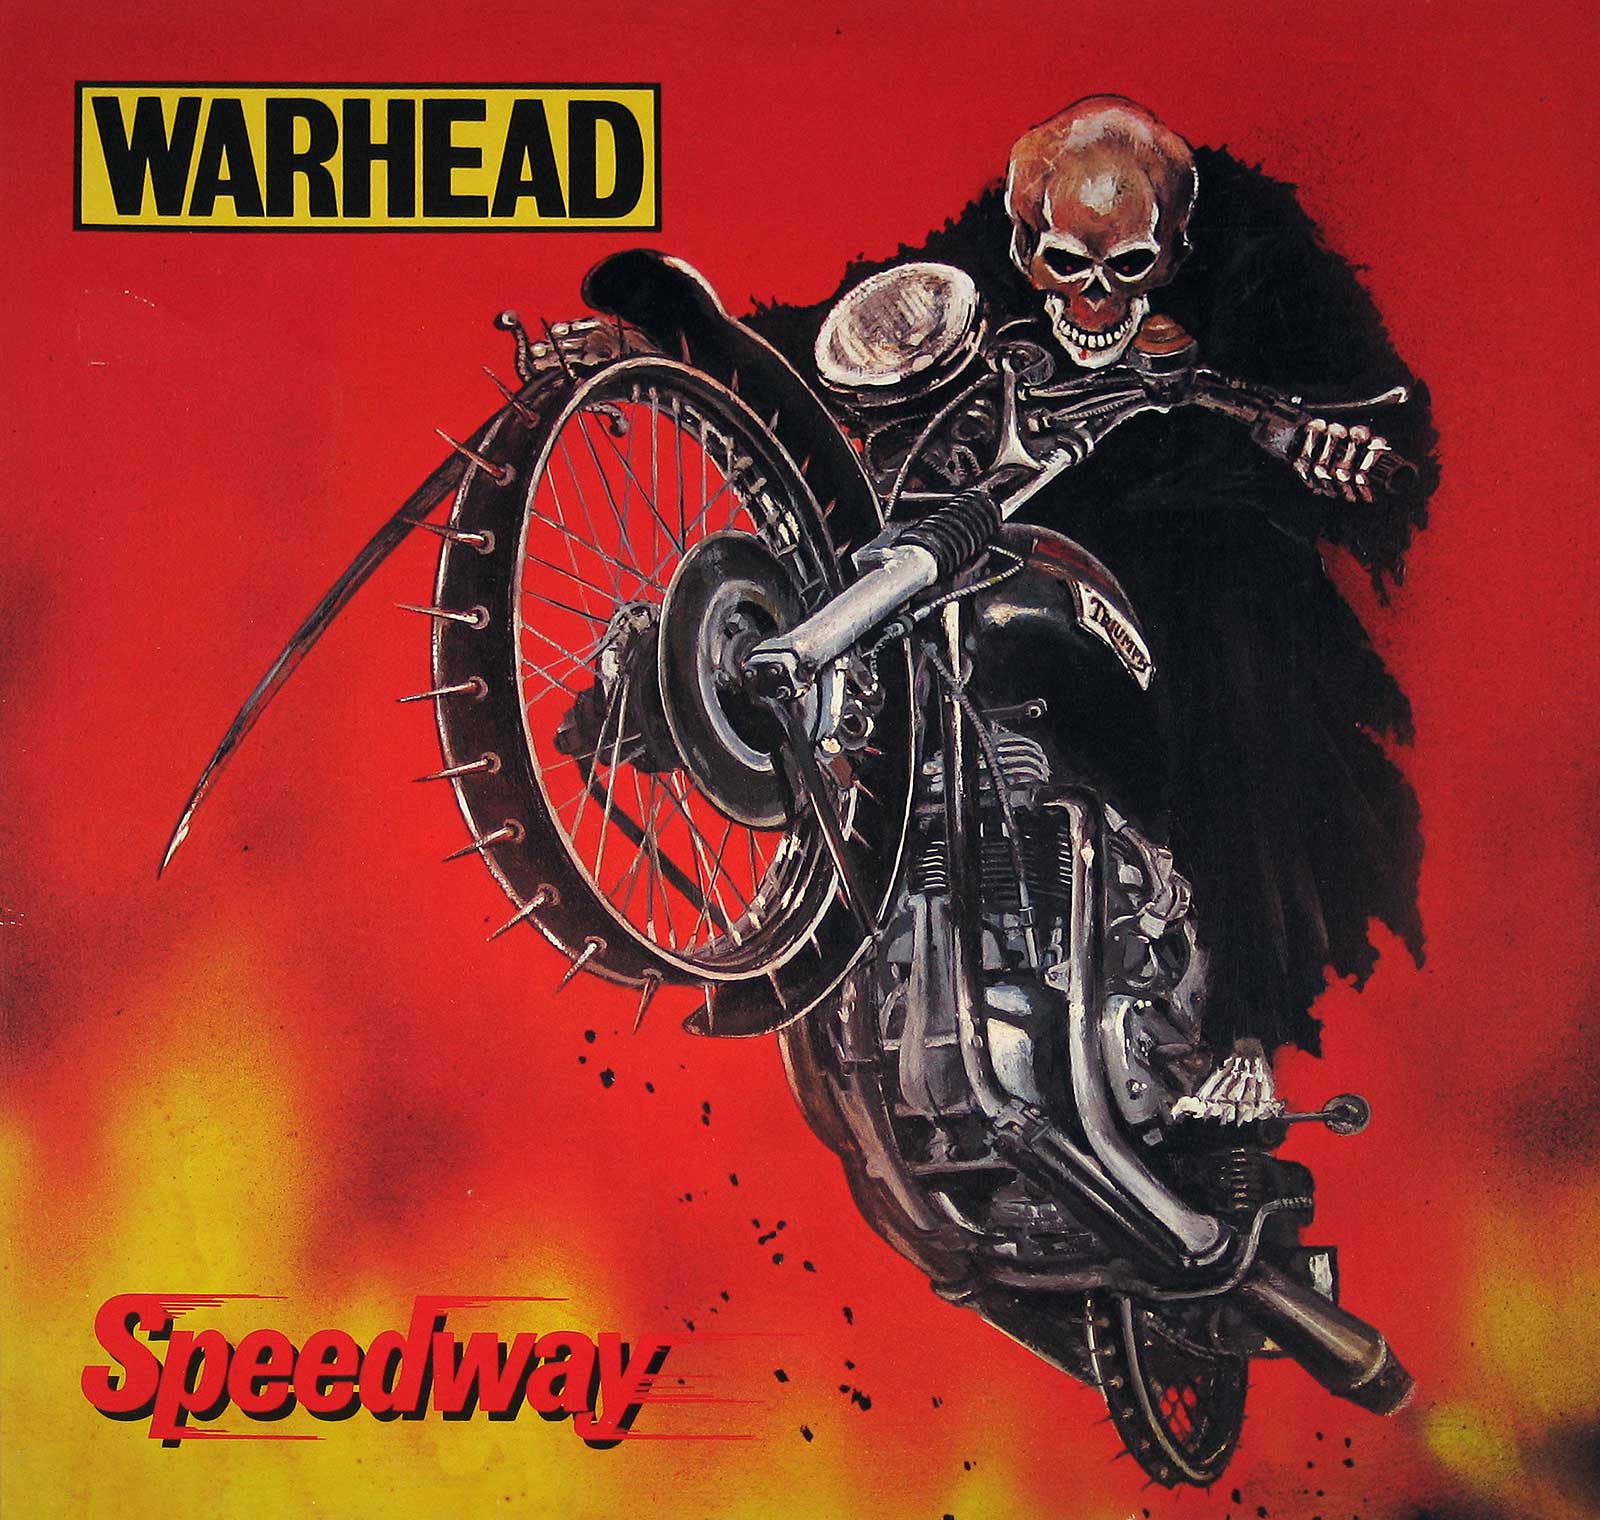 large album front cover photo of: WARHEAD Speedway Mausoleum Records 